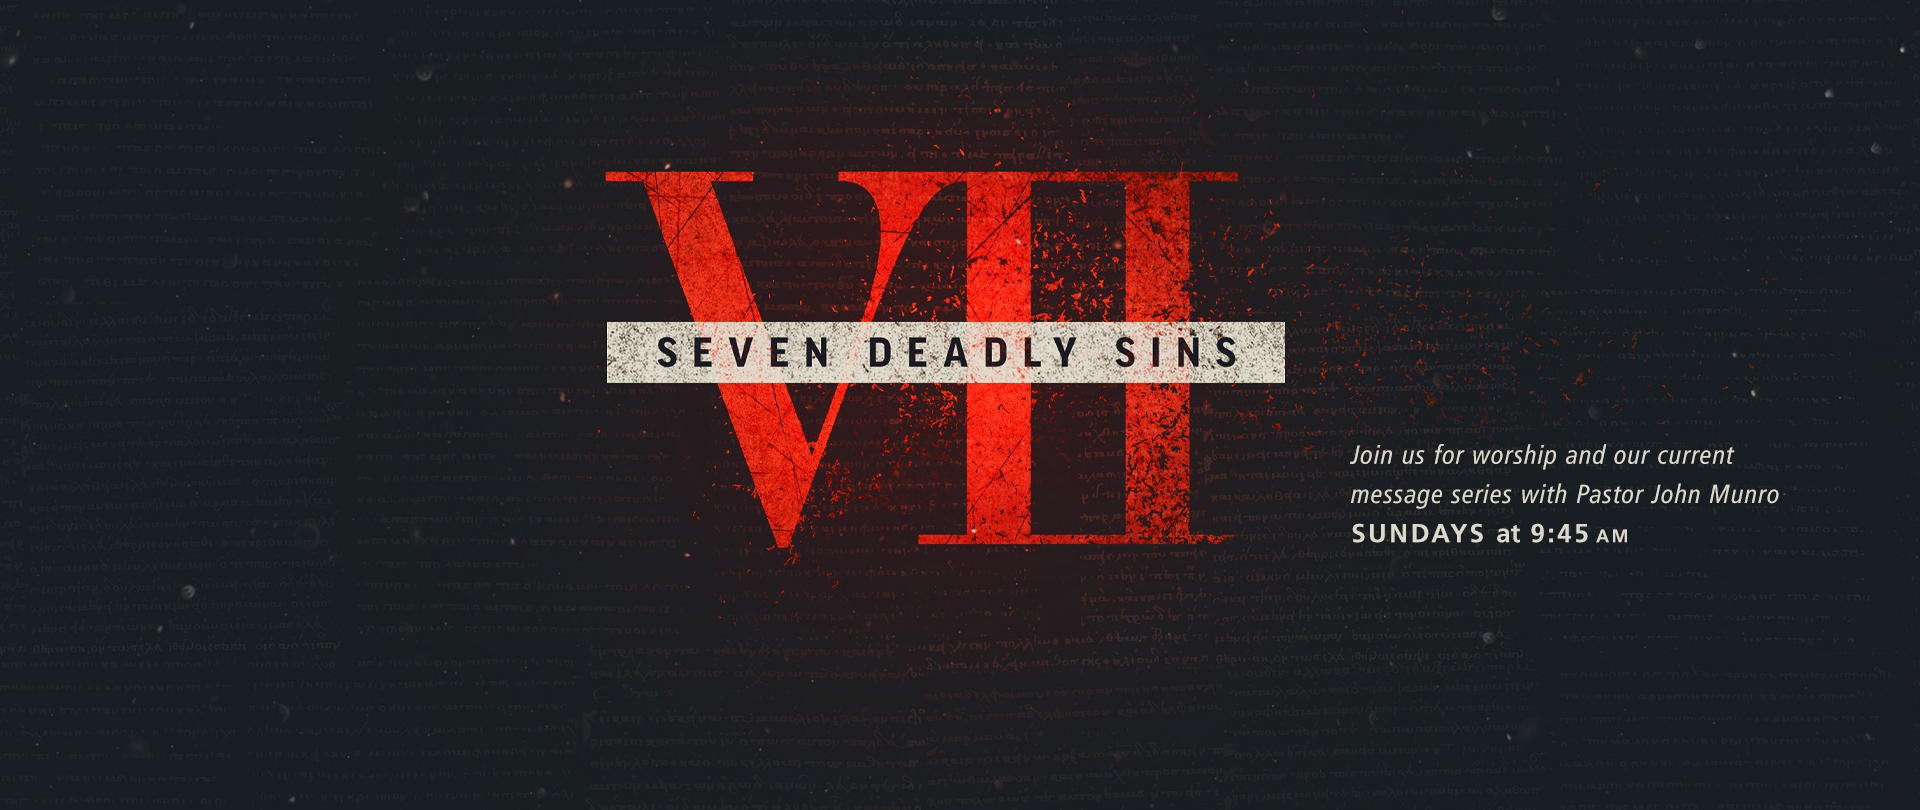 Seven Deadly Sins
Sundays at 9:45 AM
NEW FALL SERIES! 
